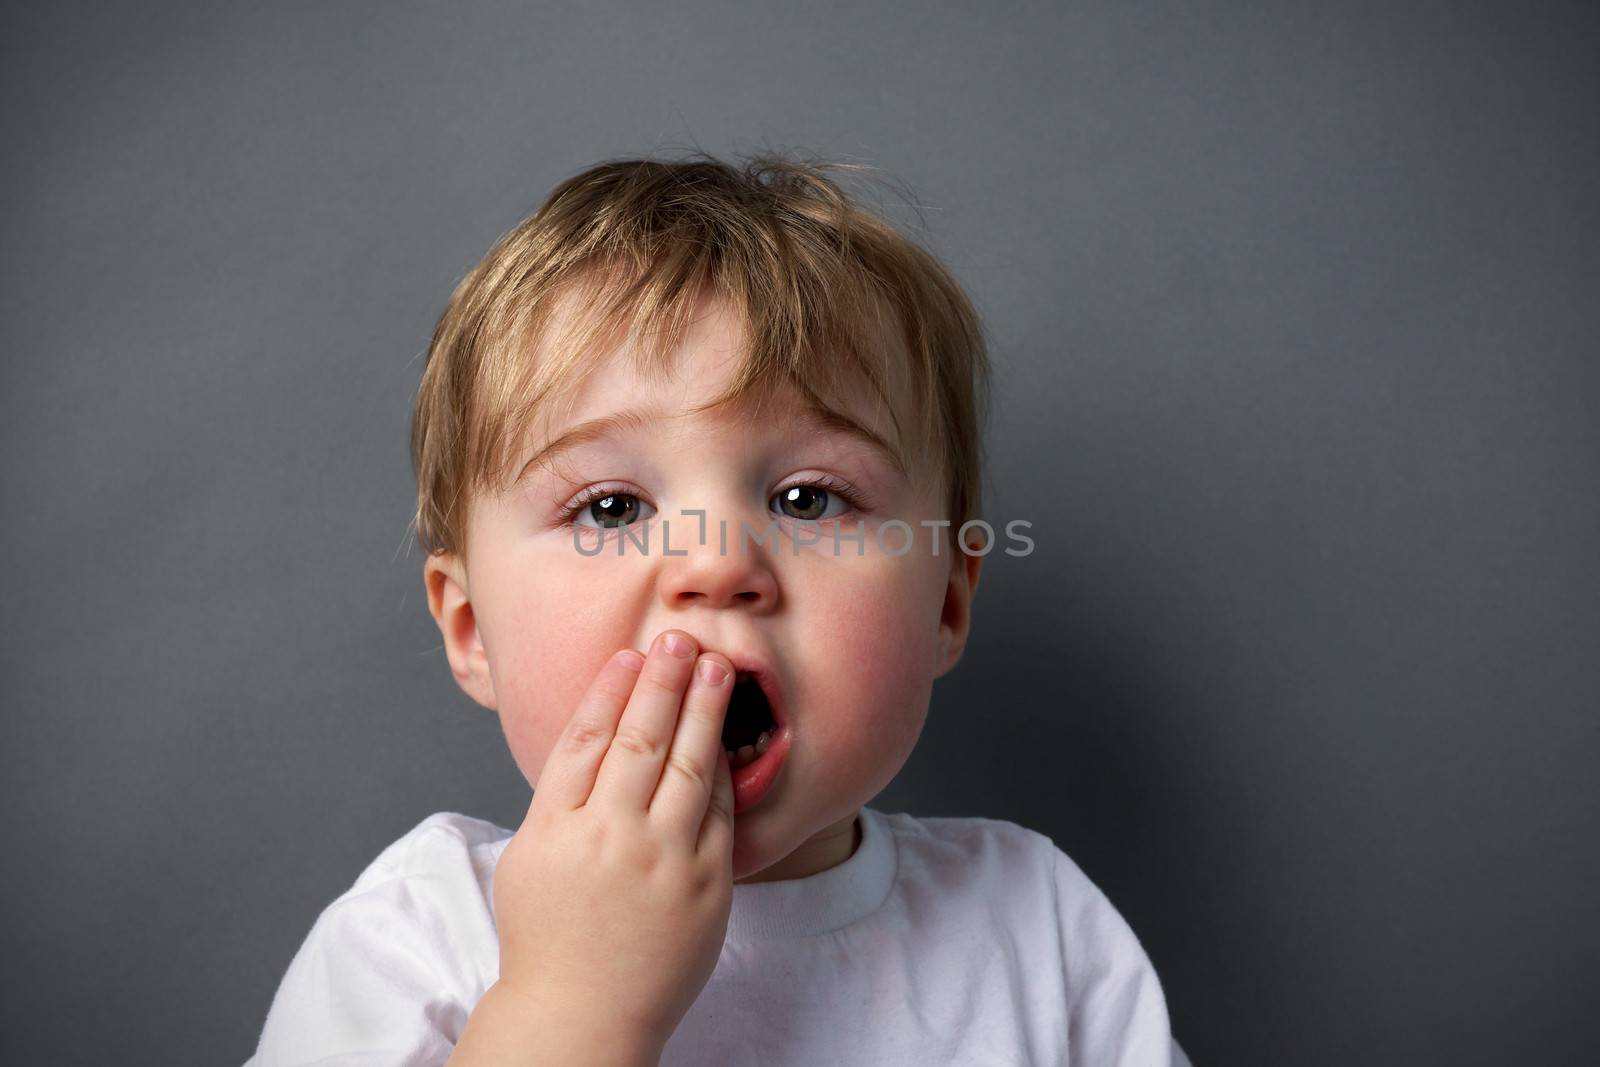 Little boy upset or hurting, toothache or other booboo concept.